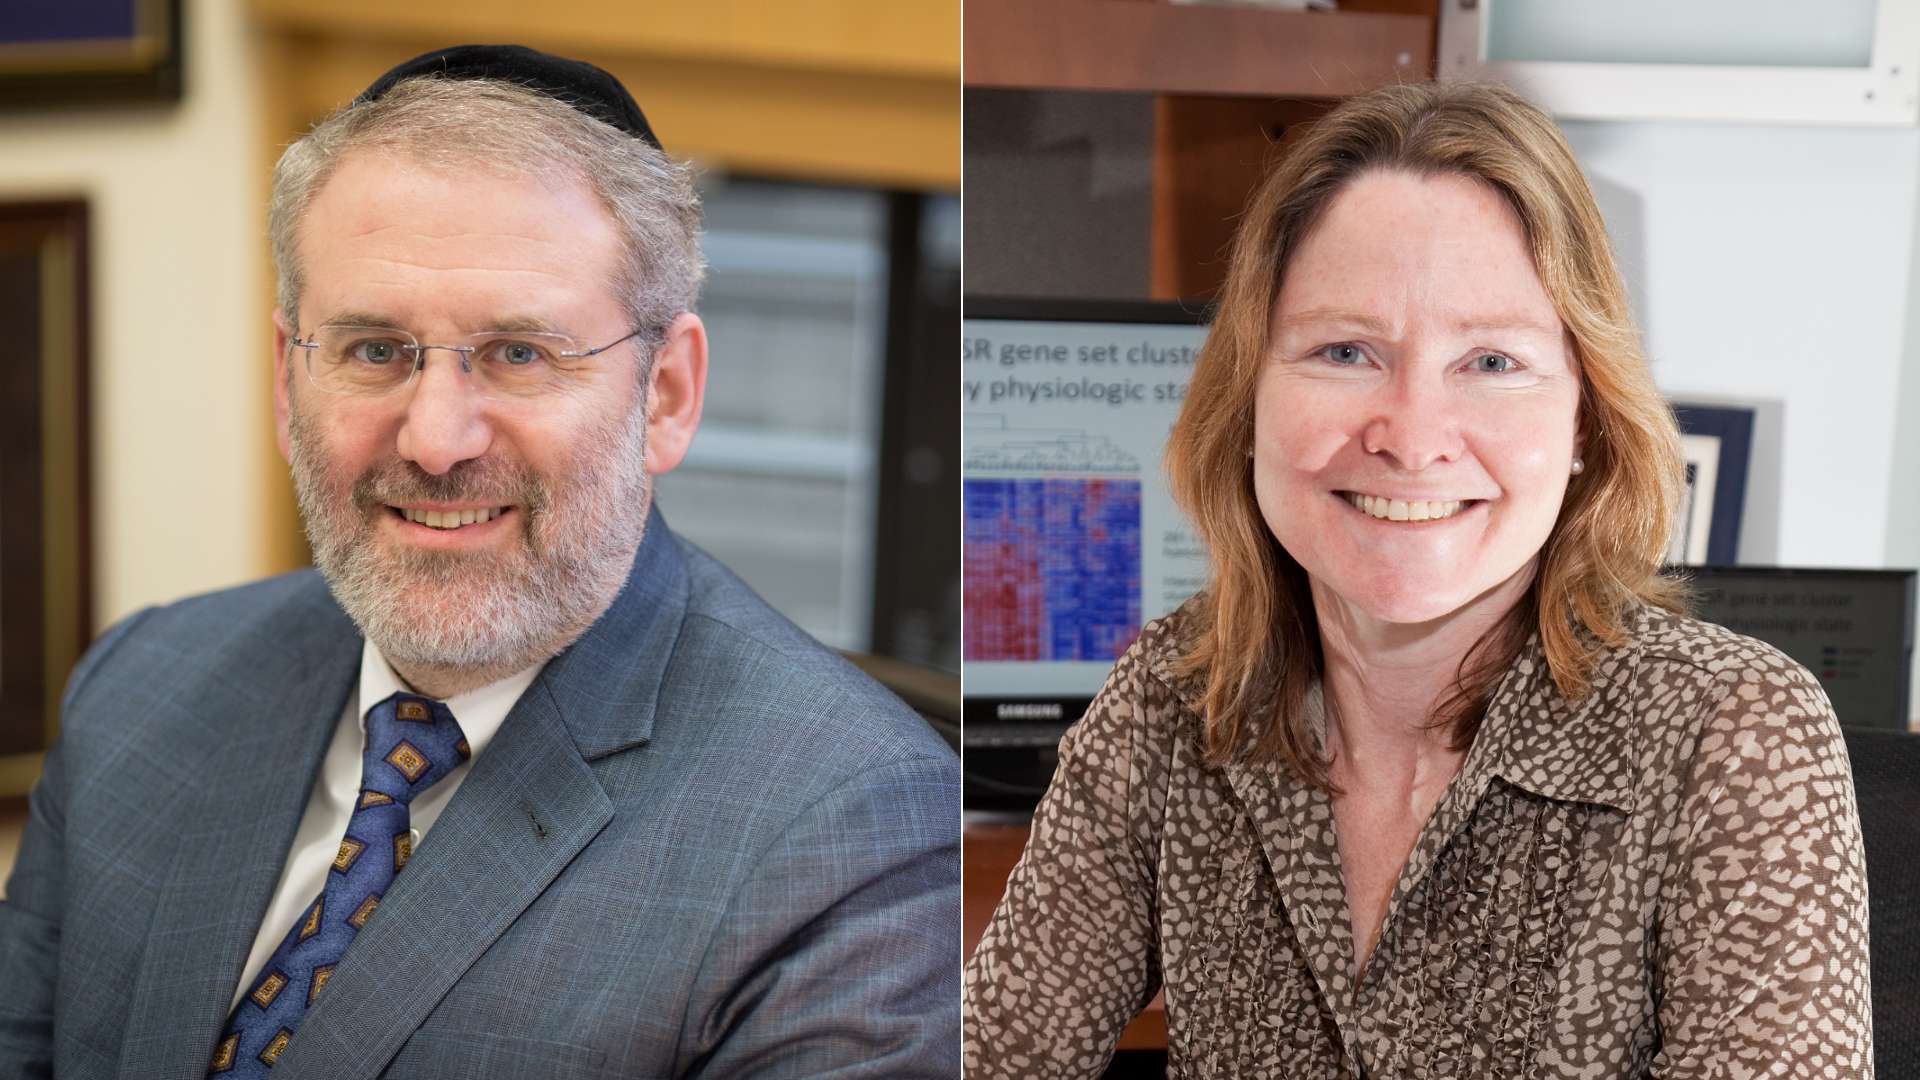 Einstein Researchers Awarded $3.5 Million NIH Grant to Study Brain Changes Caused by COVID-19